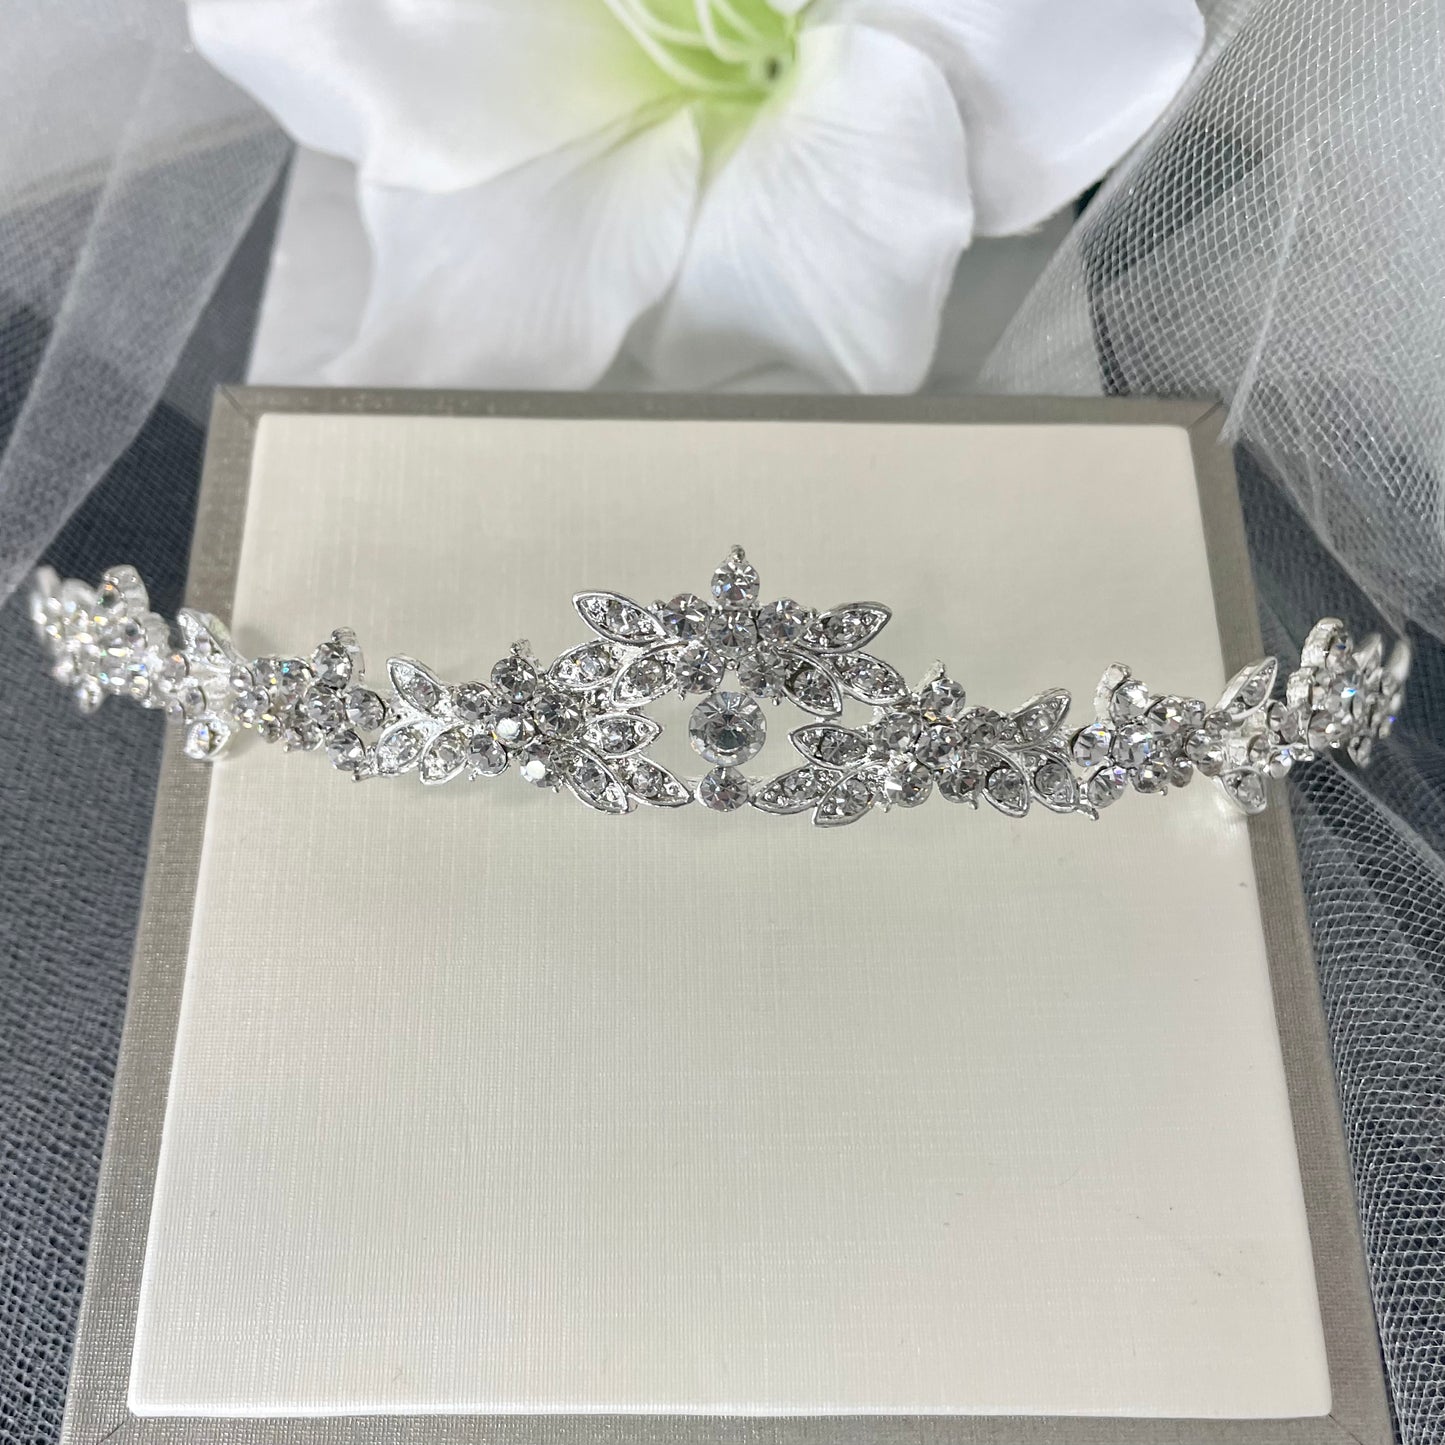 Introducing the Exquisite Indiana Diamanté Tiara: A Stunning Leaf and Floral Design Masterpiece